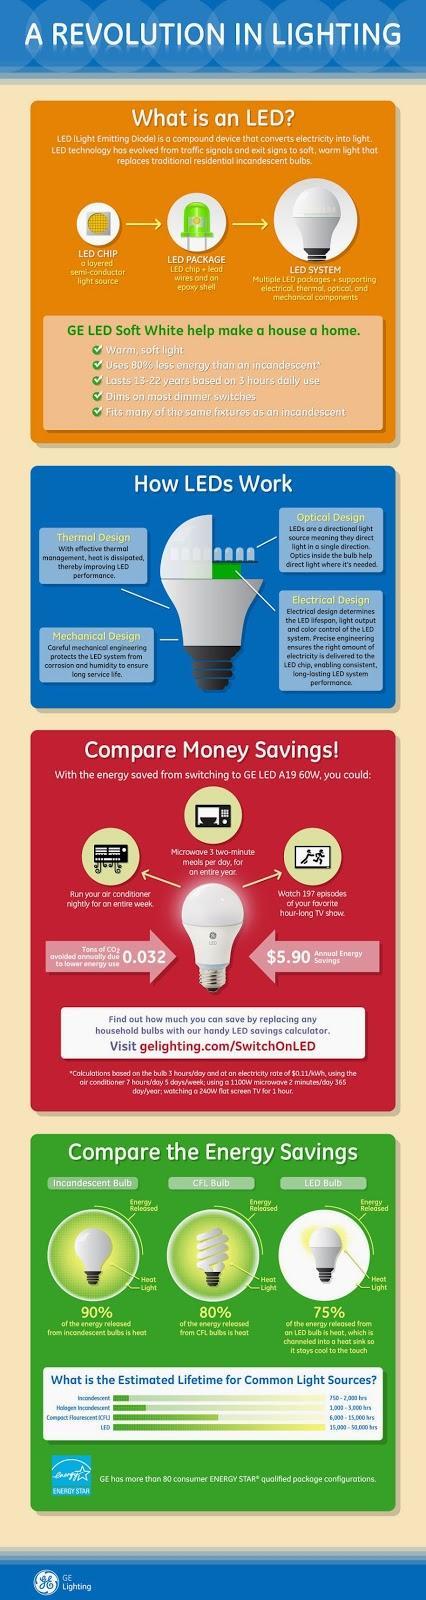 Choosing the Right Light Bulb for All Your Household Needs!